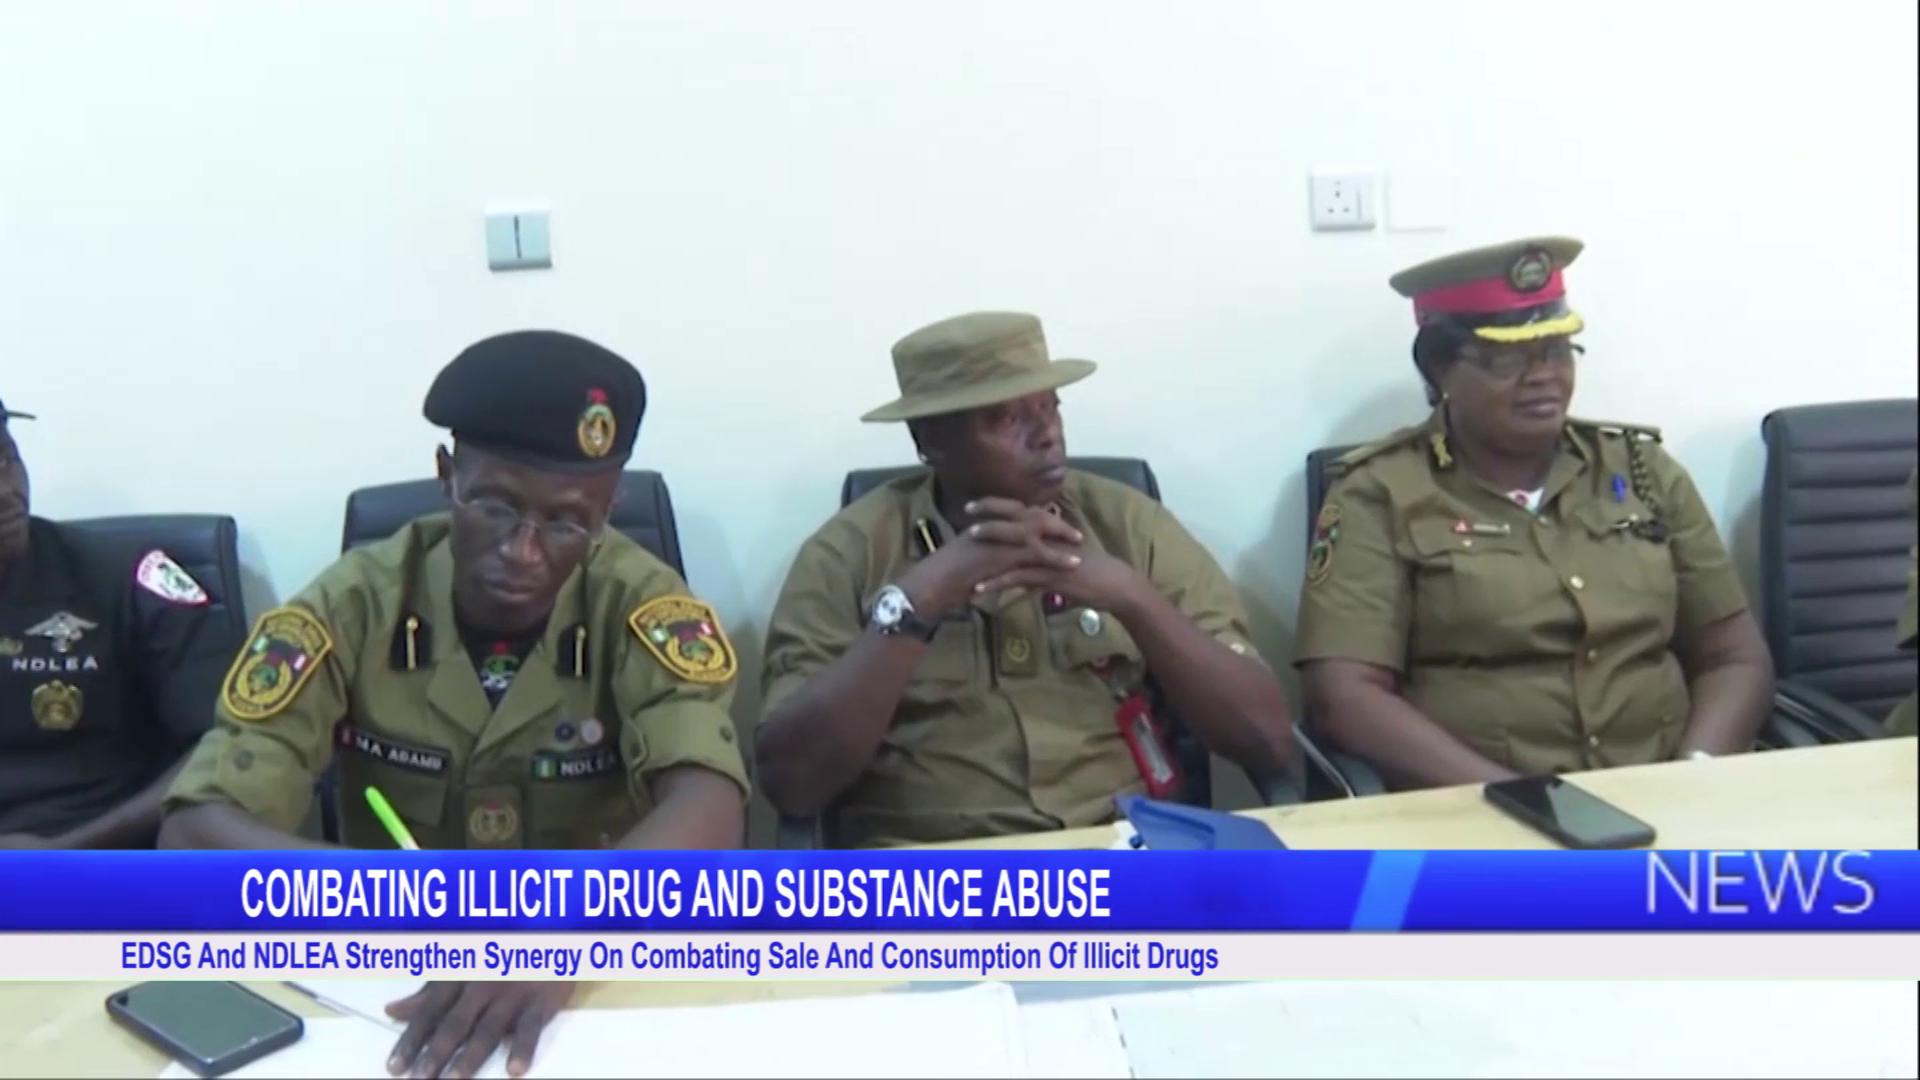 EDSG And NDLEA Strengthen Synergy On Combating Sale And Consumption Of Illicit Drugs